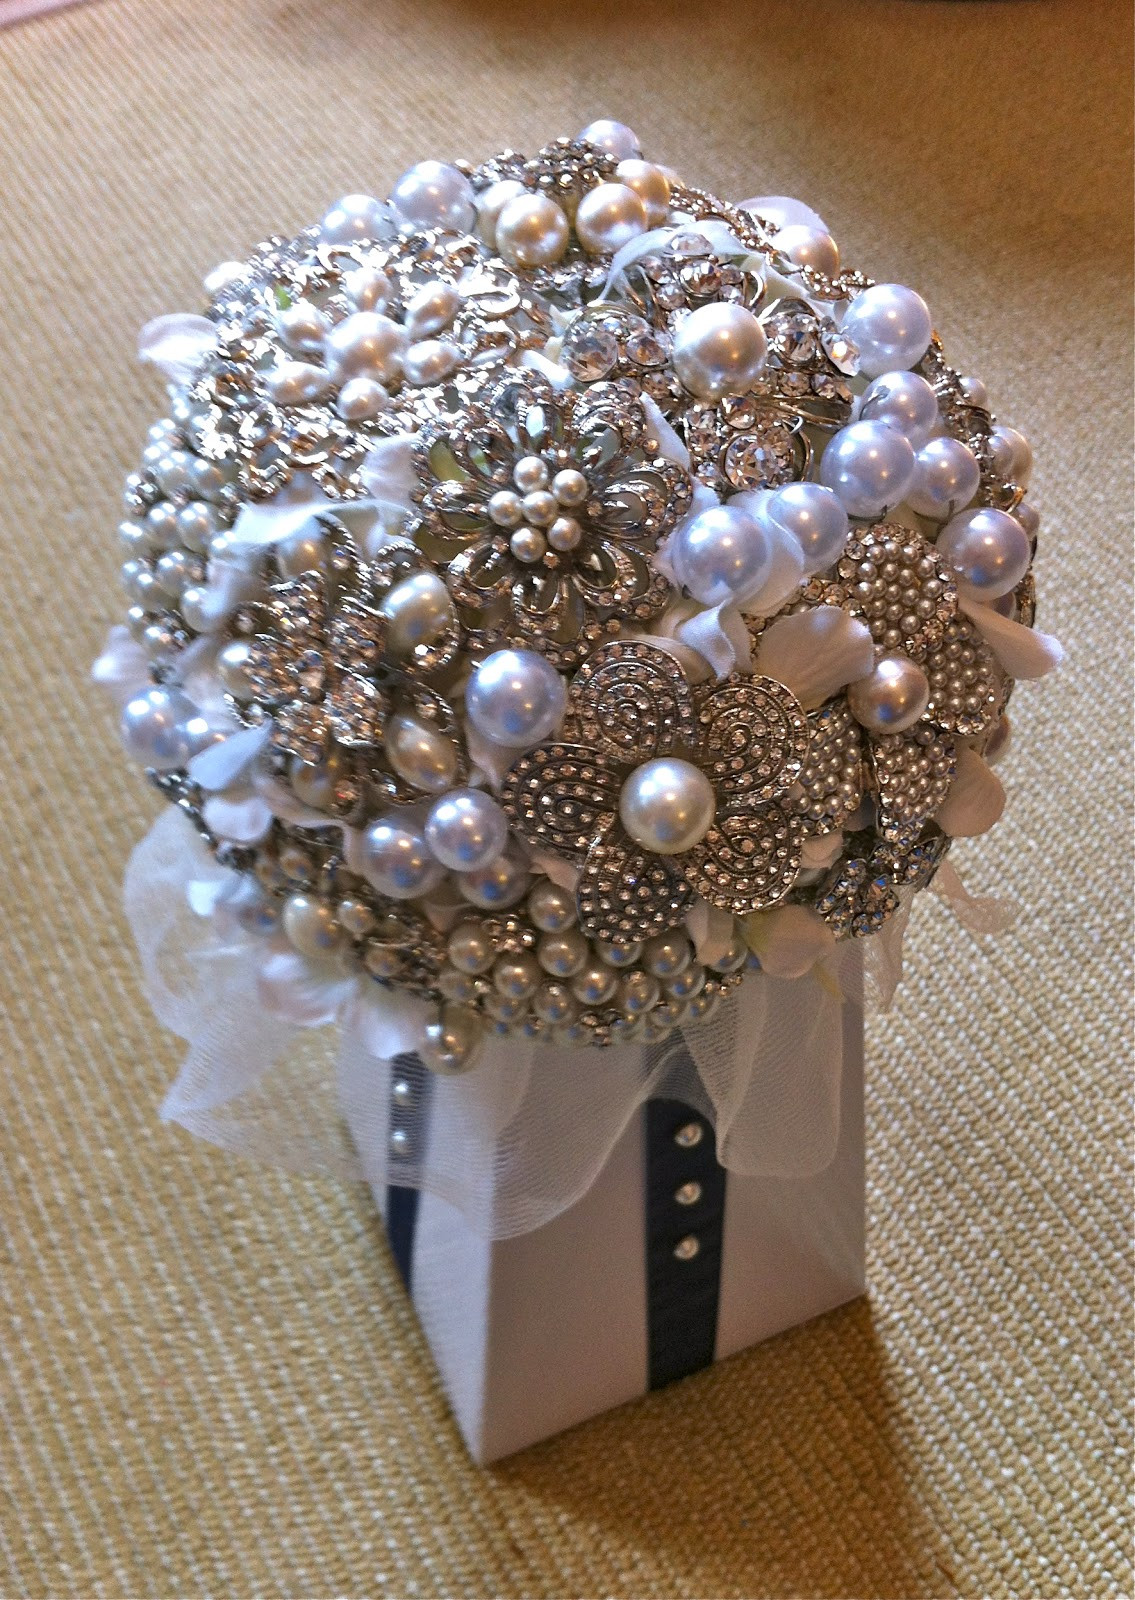 Brooches Diy
 Have You Seen My New DIY Brooch Bouquet Page